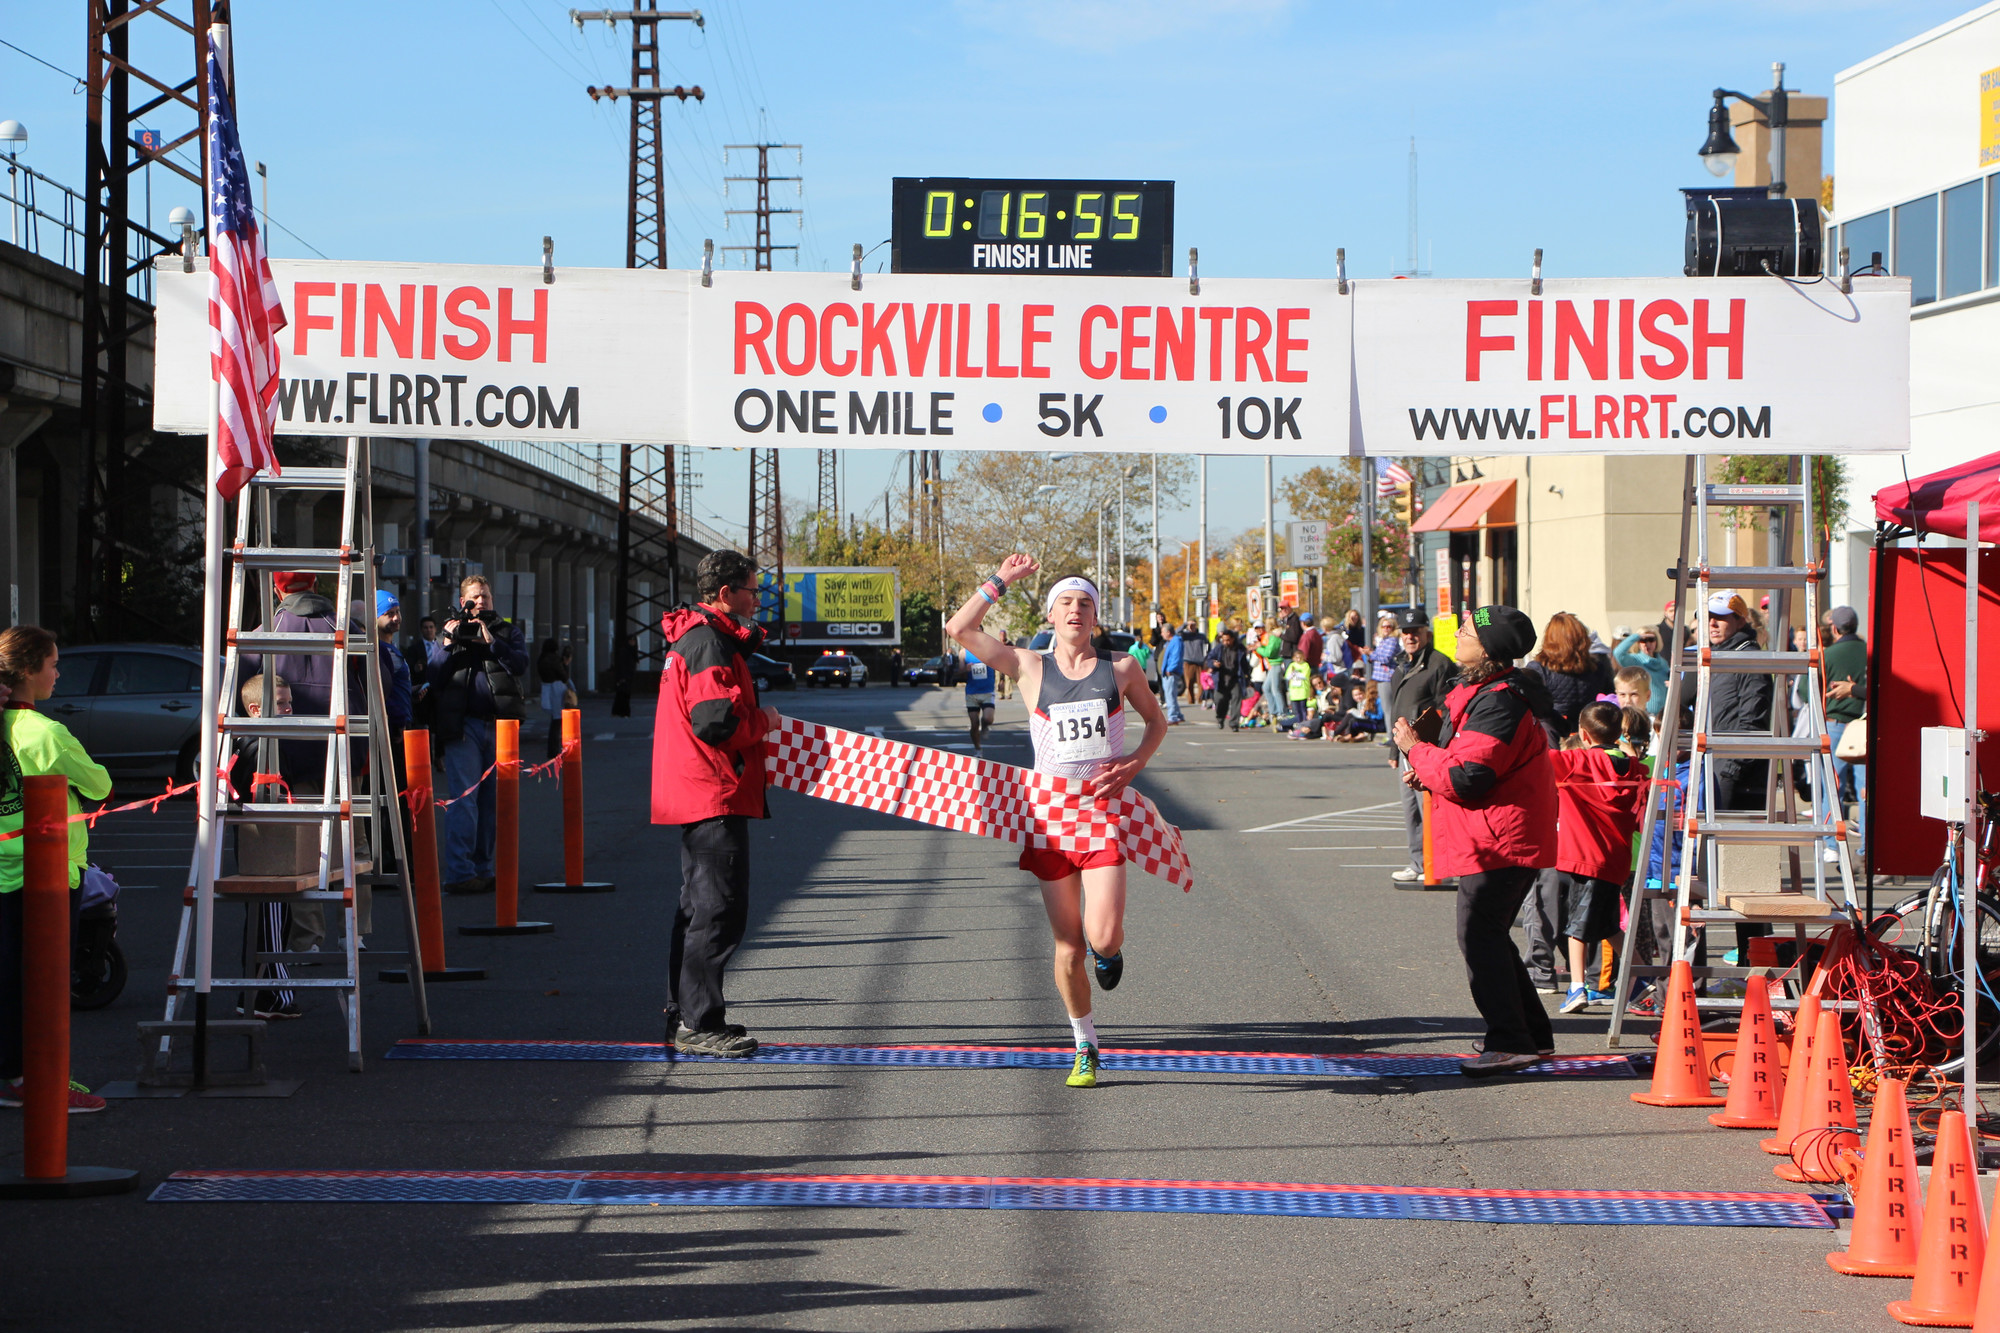 Shaun Collins, a 17-year-old runner from Ambler, Pa., was the first runner to finish the 5K.